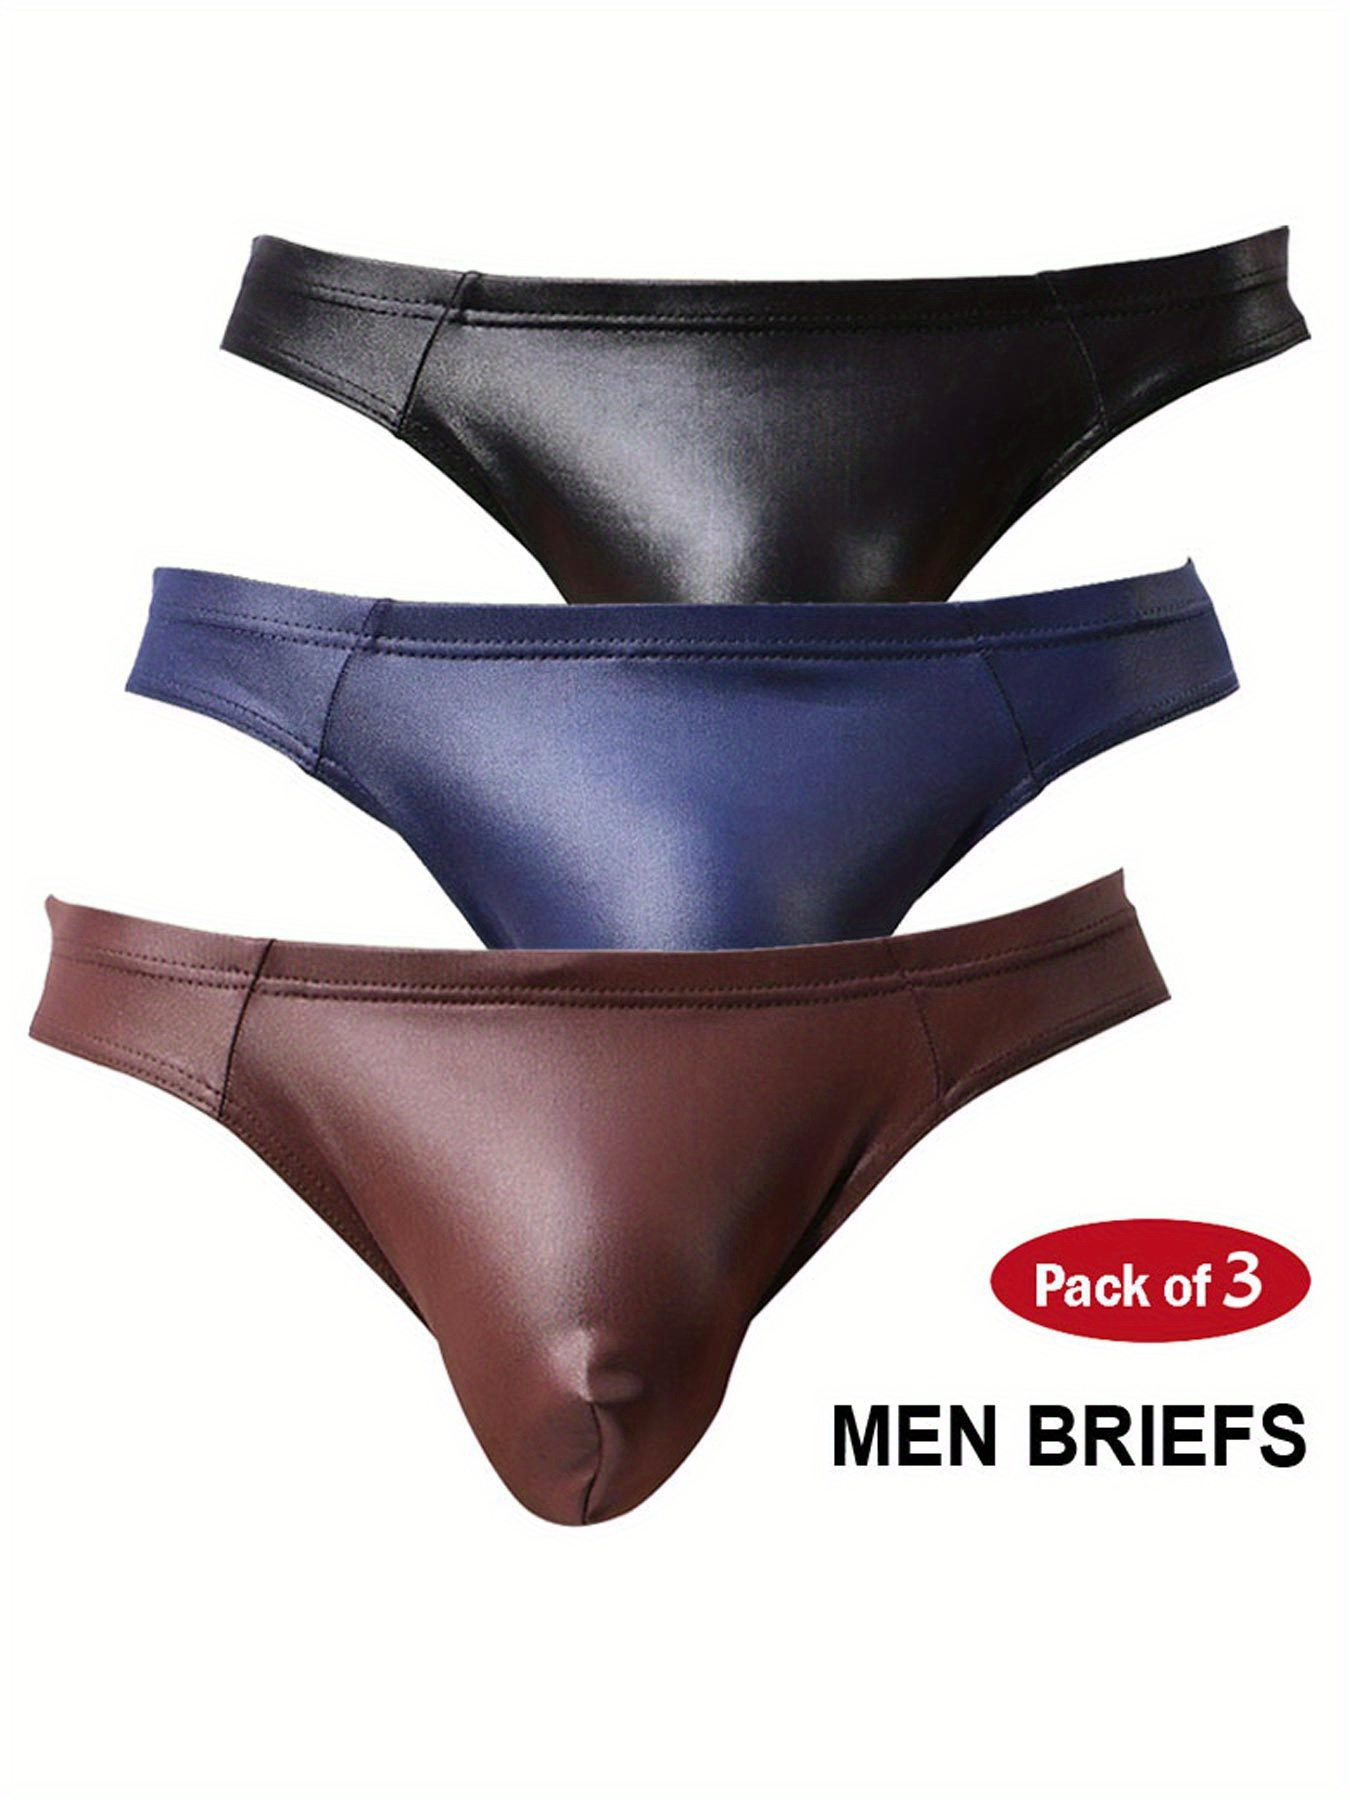 Men Faux Leather Thong Underwear, Cheeky Briefs, Bulge Pouch, Side